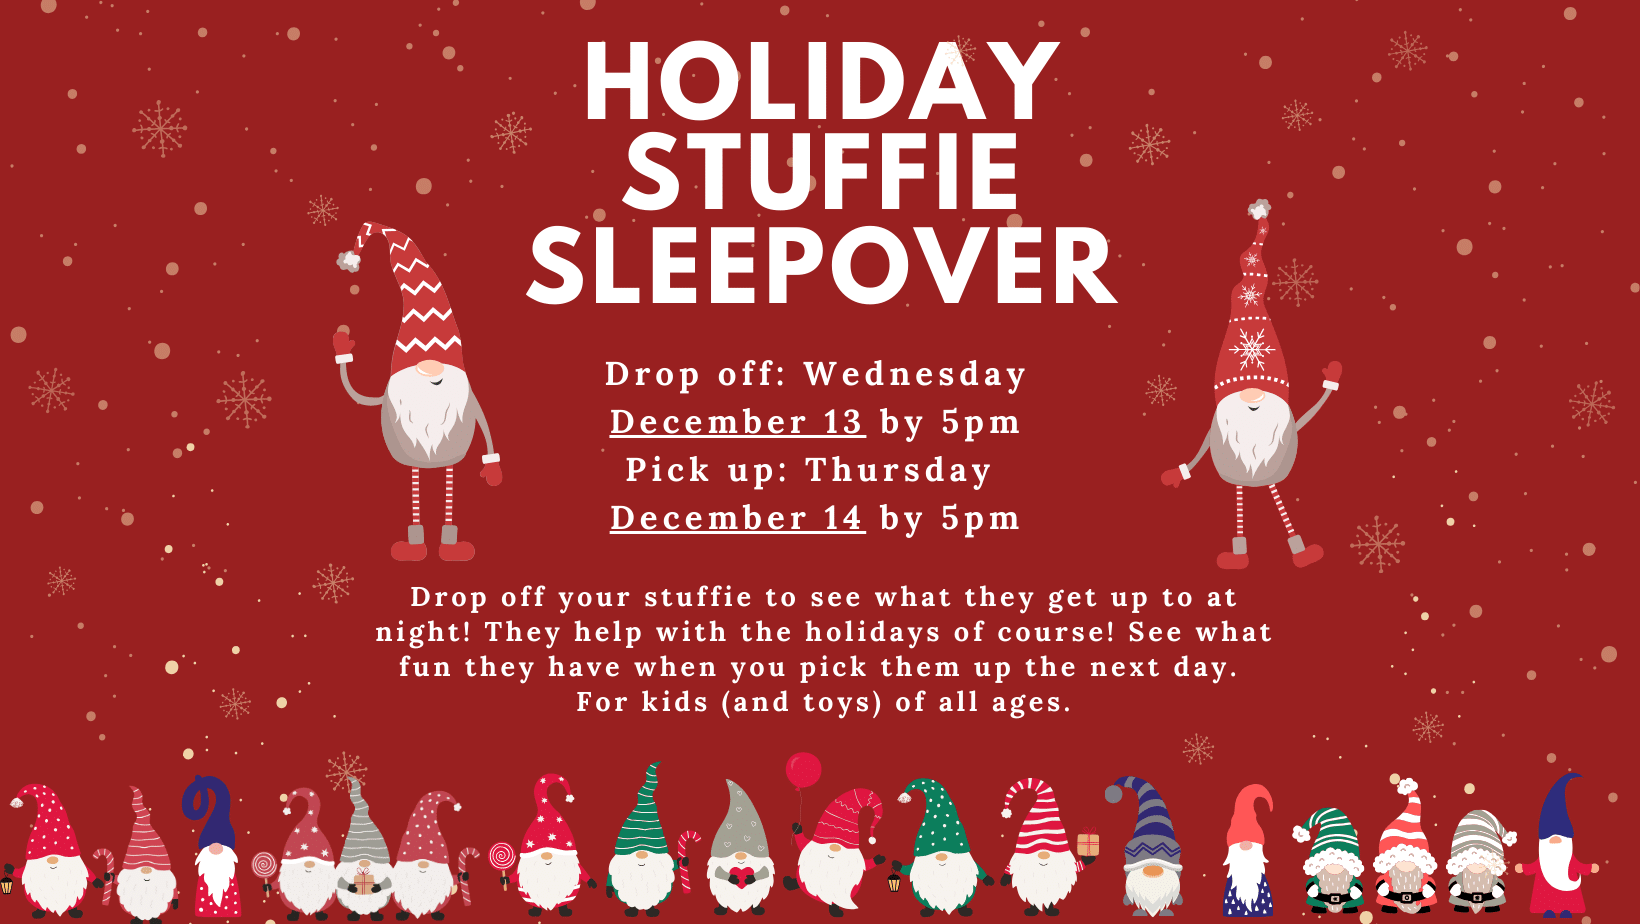 Holiday Stuffie Sleepover. Drop off Wednesday, December 13 before 5 pm, pick up Thursday December 14 before 5 pm